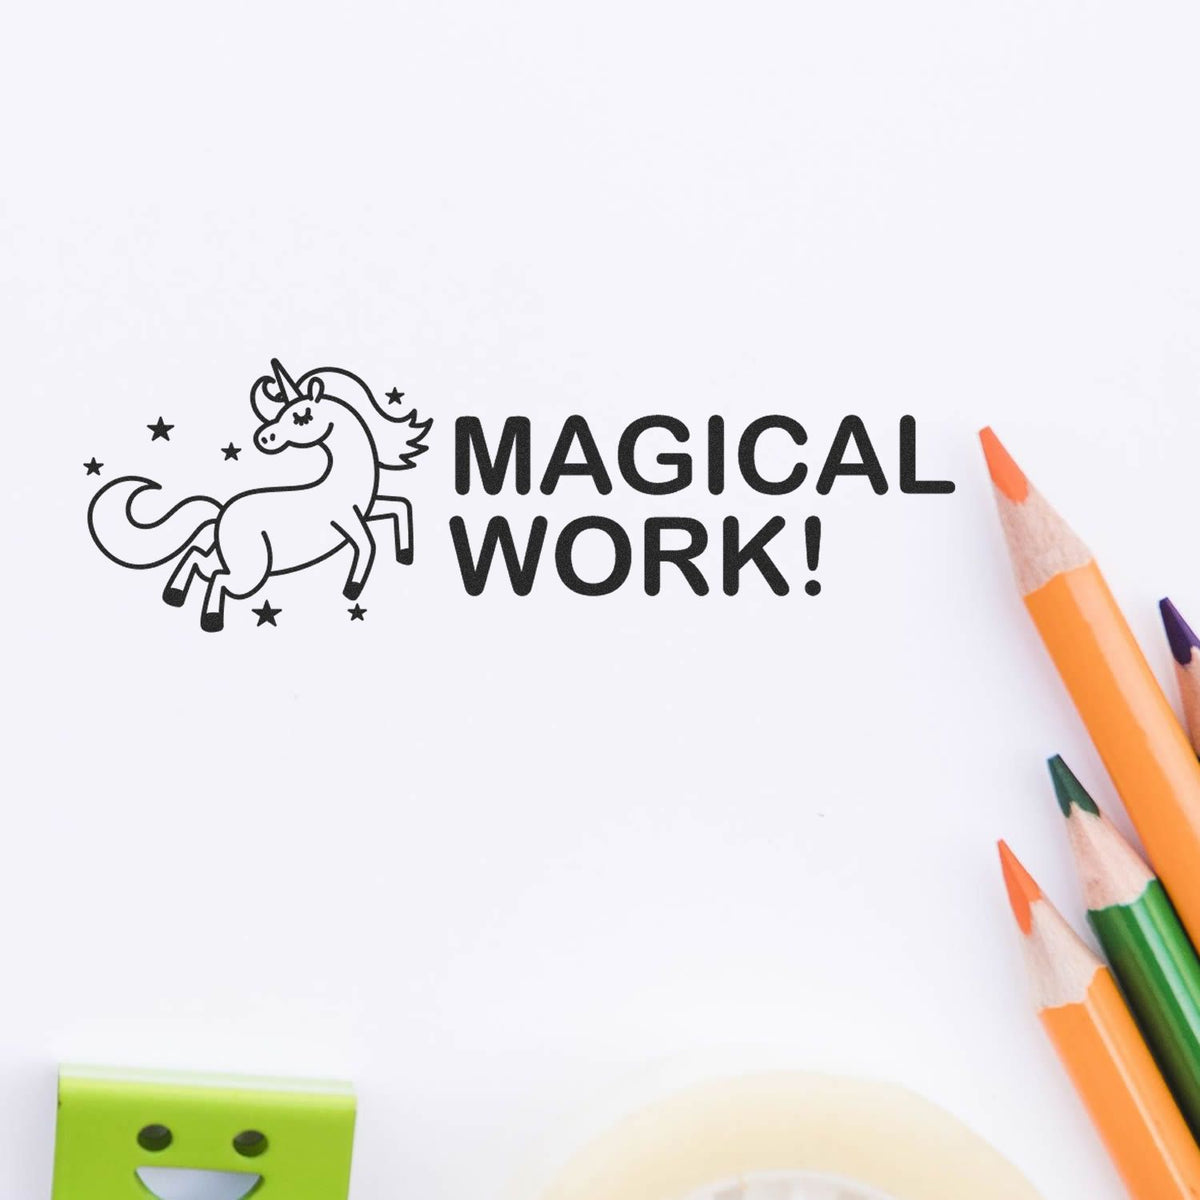 Large Magical Work Rubber Stamp Lifestyle Photo